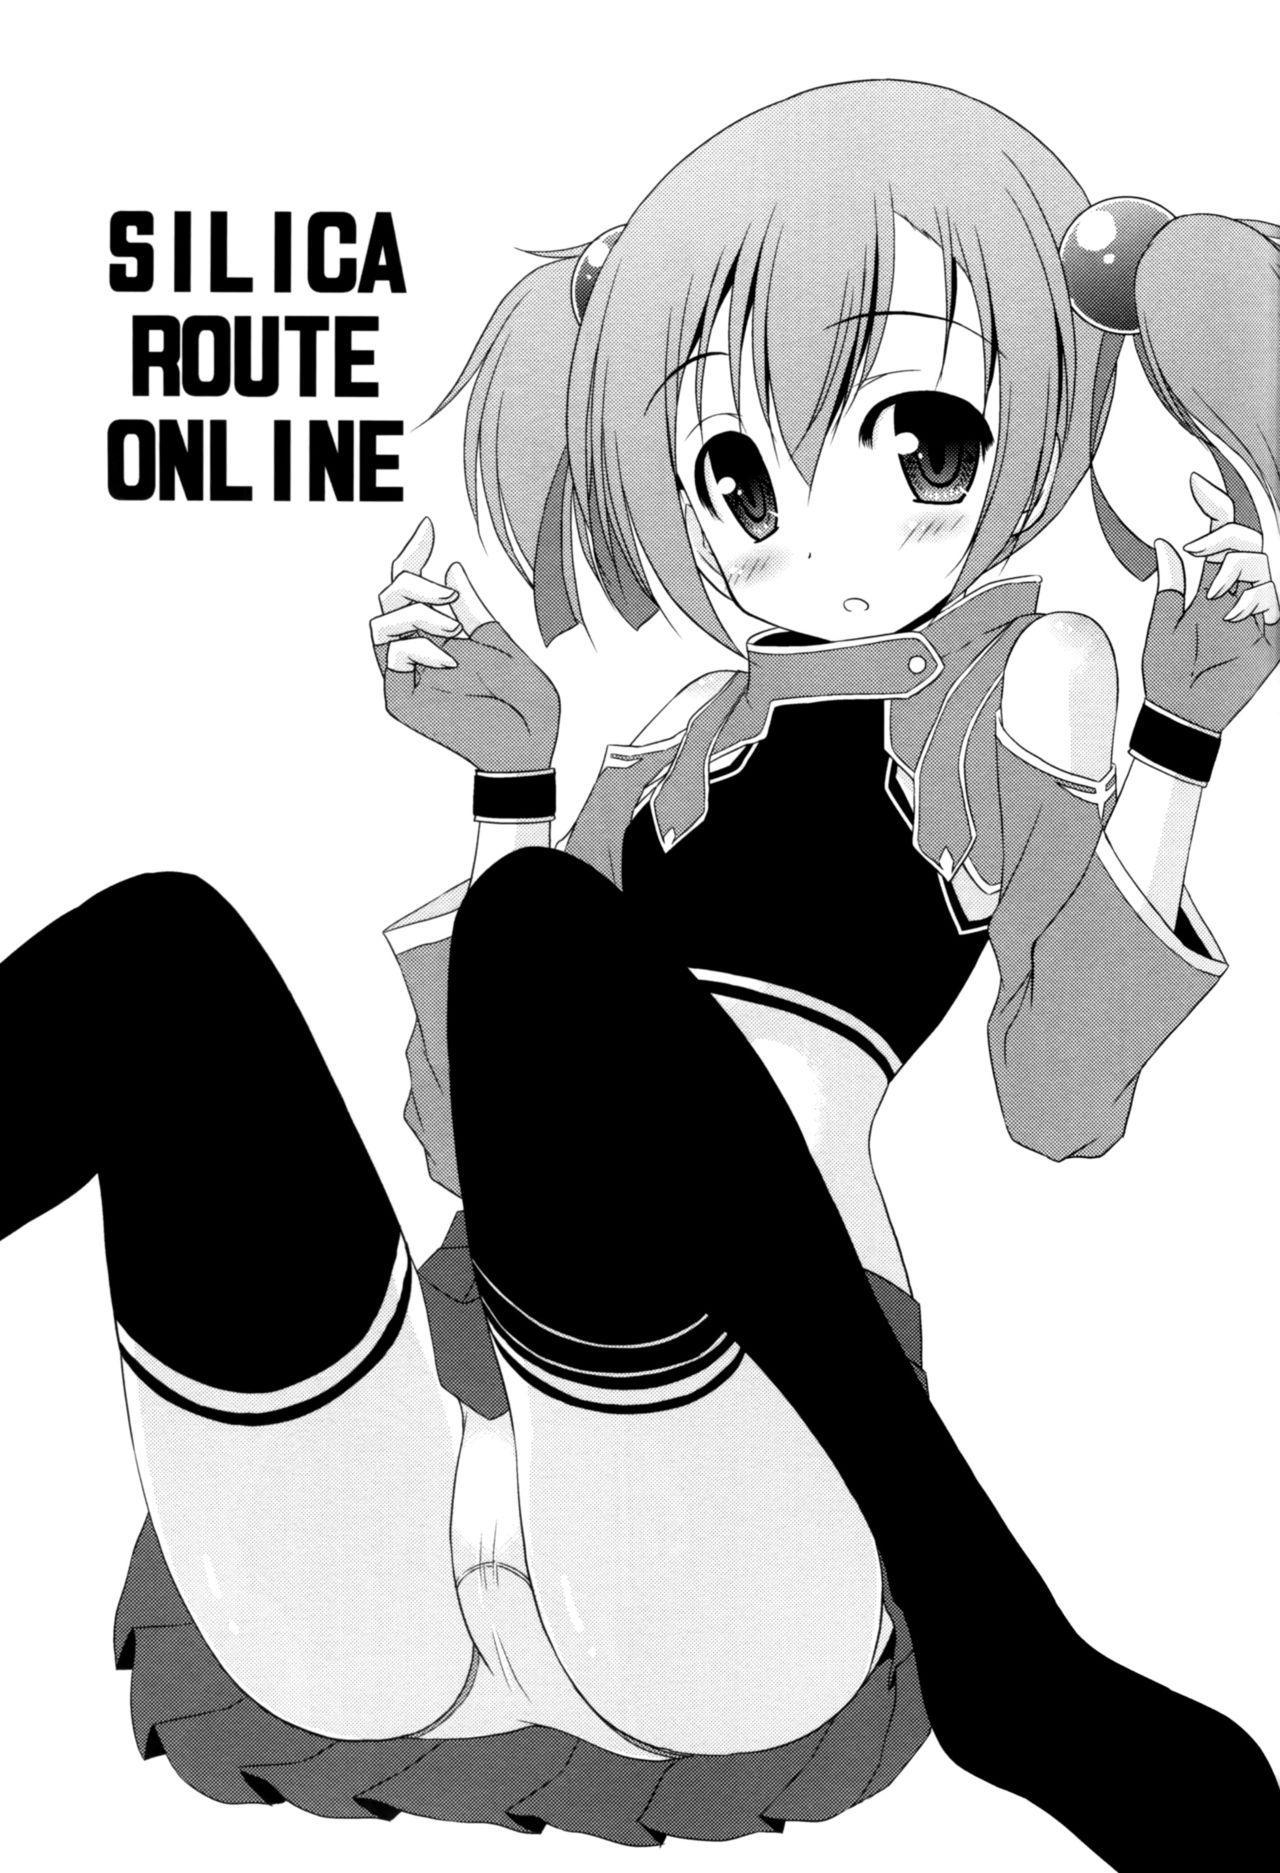 Big Black Dick Silica Route Online - Sword art online Pure18 - Page 2